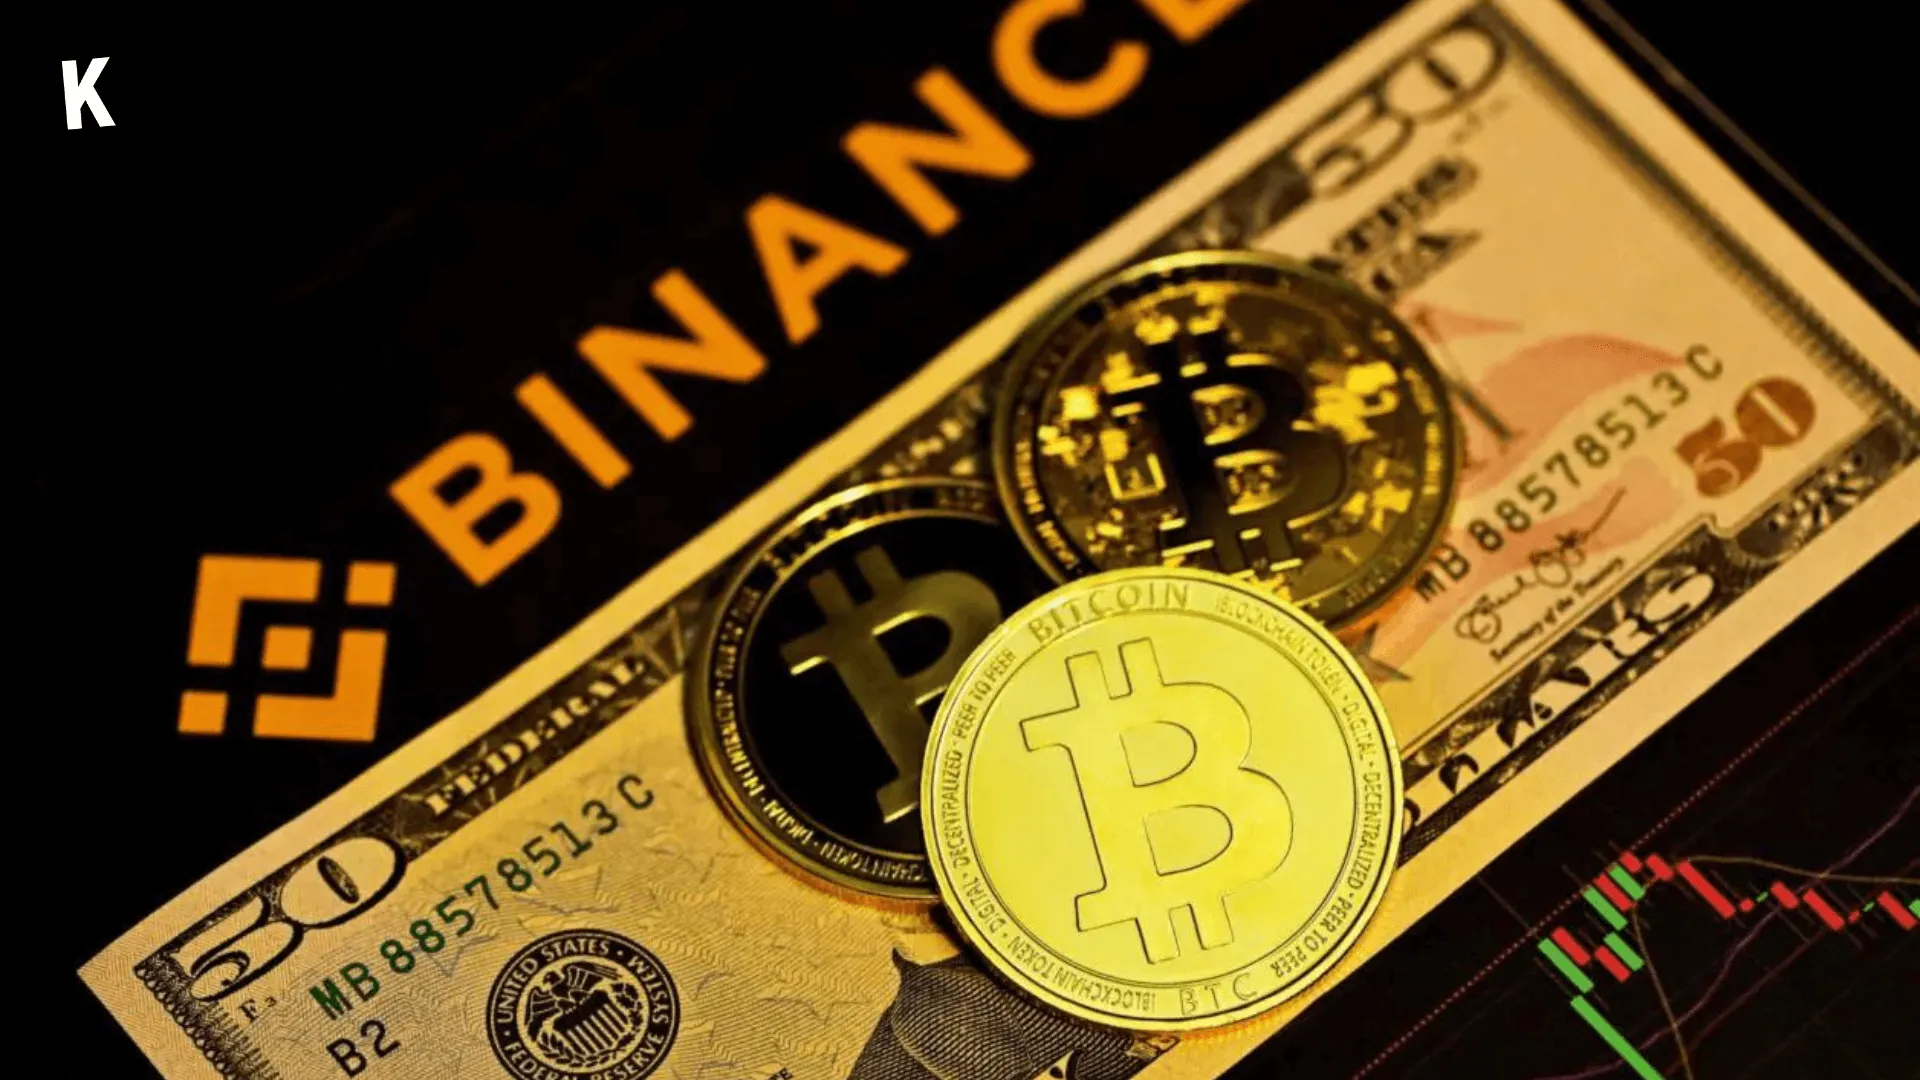 Bitcoins and a 50-dollar note on a background with Binance logo and a financial chart